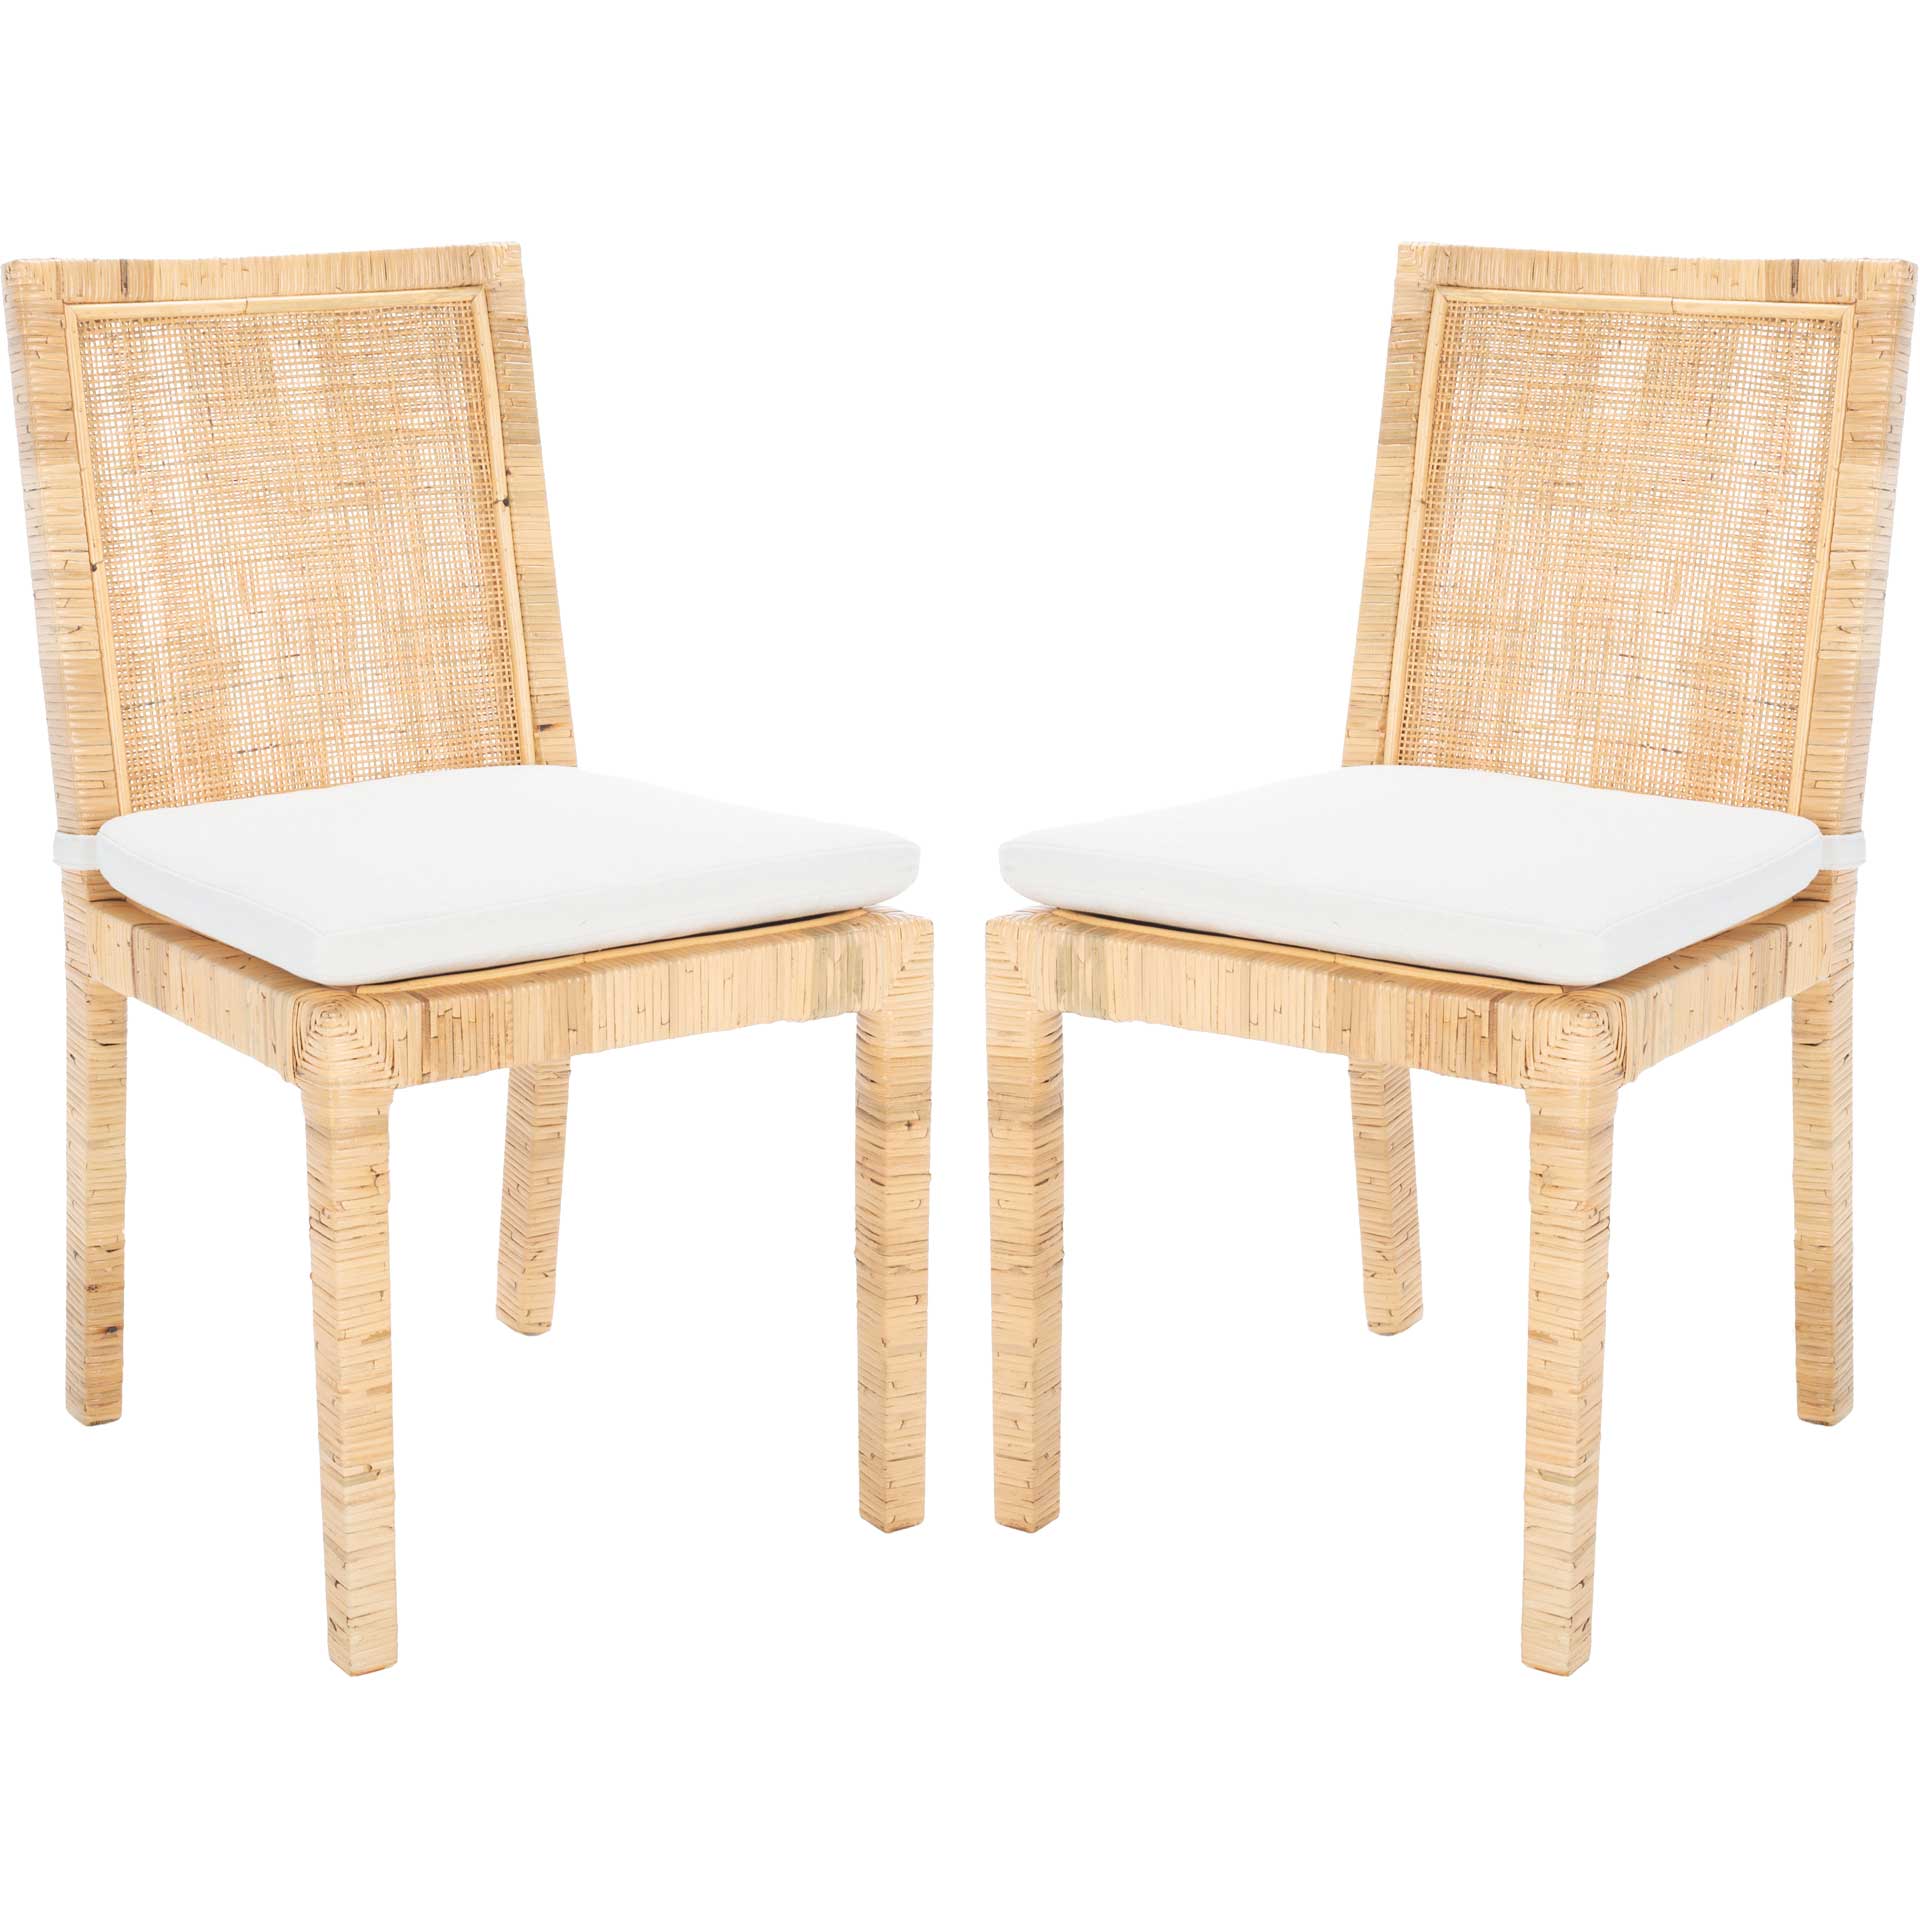 Torence Cane Dining Chair Natural/White (Set of 2)